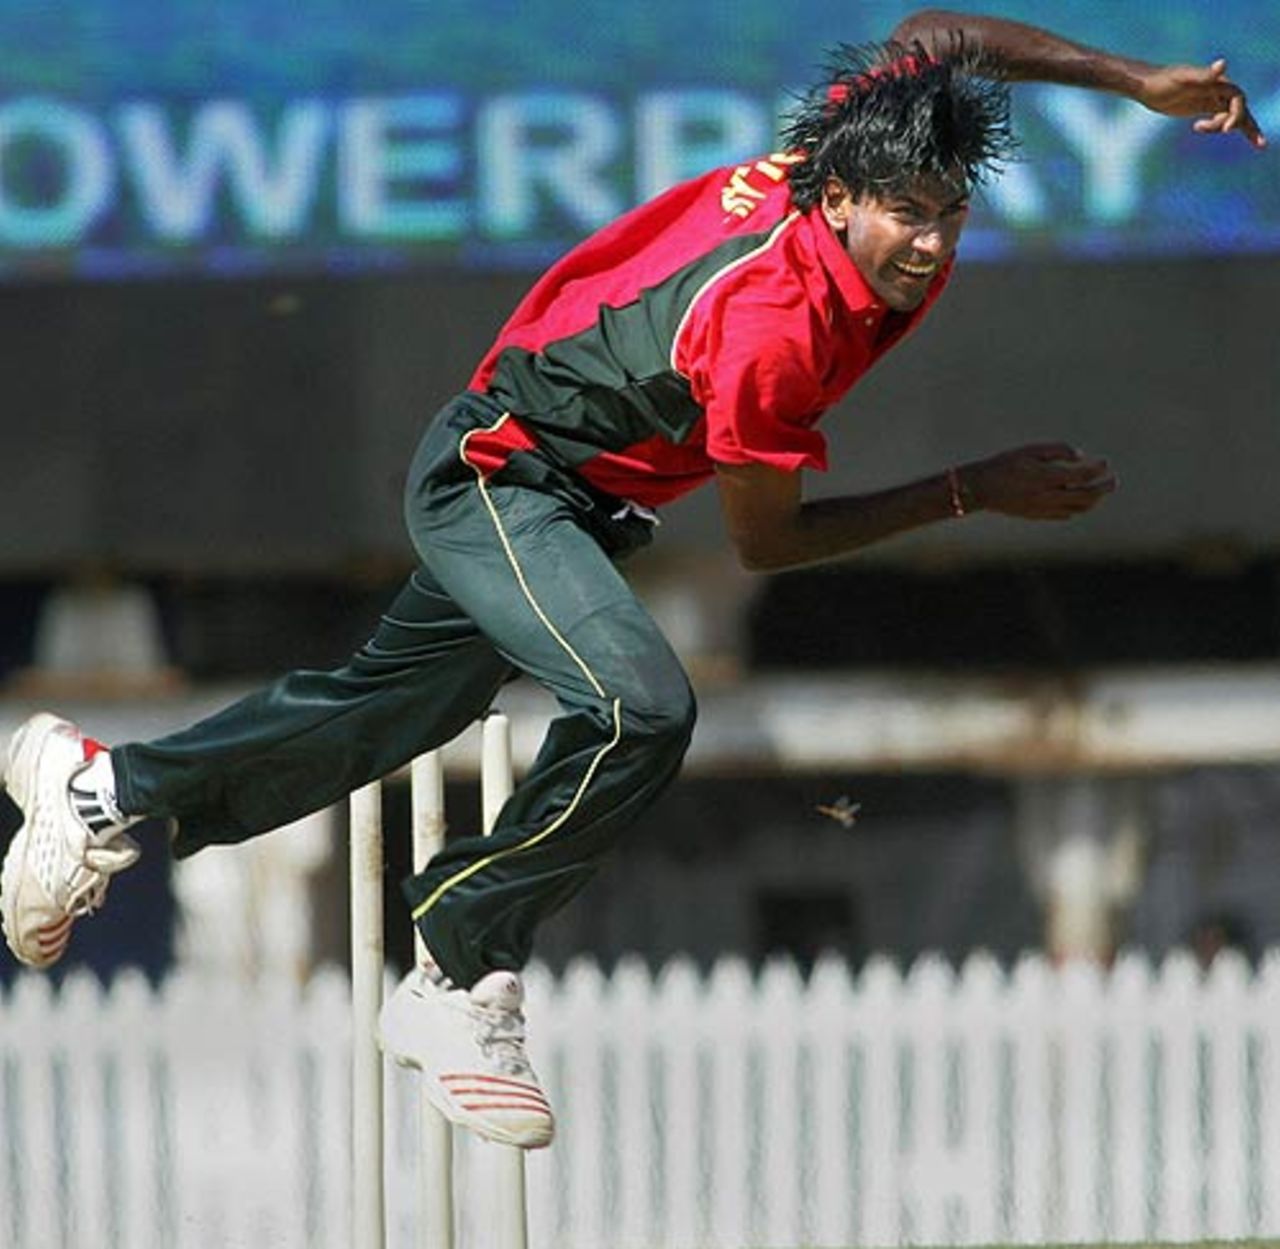 Lakshmipathy Balaji in action in the second game, India Blue v India Green, Challenger Series, Chennai, October 2, 2006